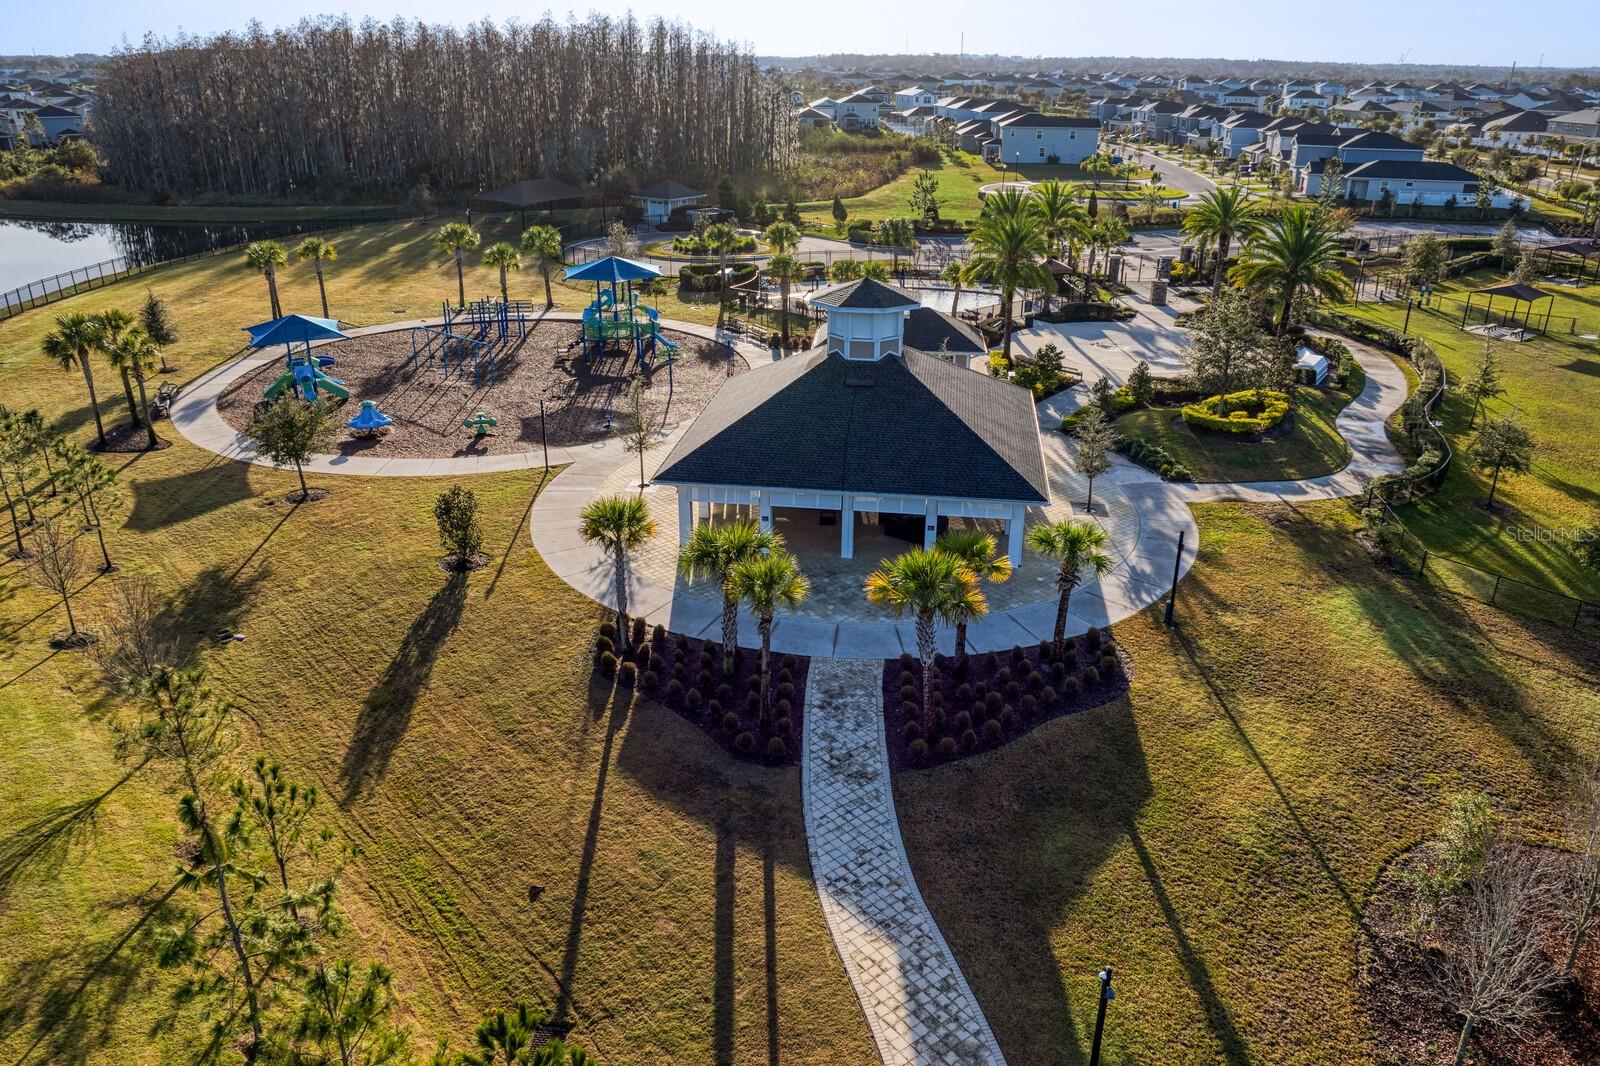 Promenade Park is our second amenity center with outdoor pavillion, playgrounds, picnic areas, and third pool.